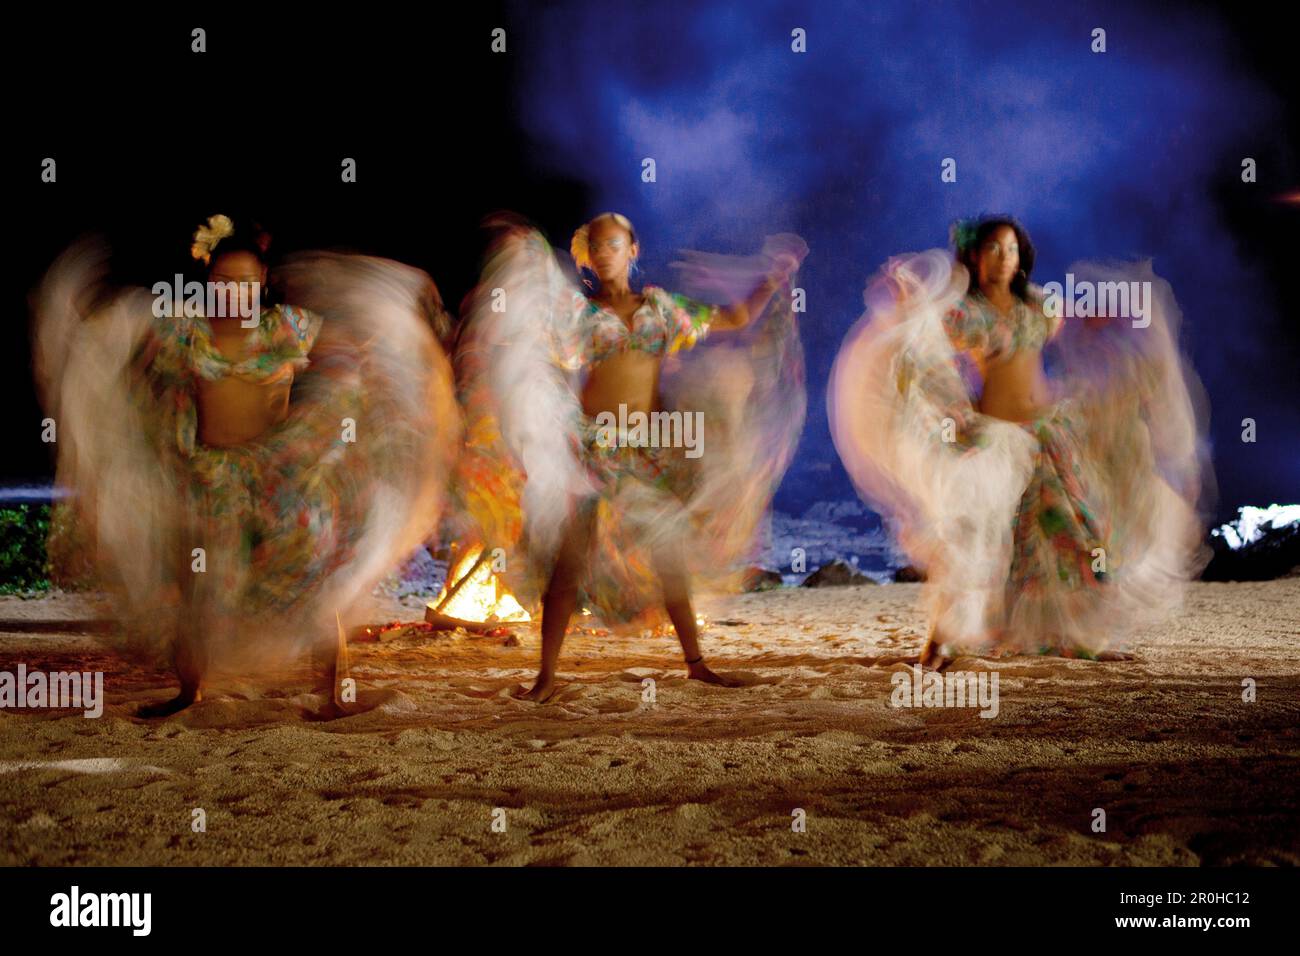 MAURITIUS, Sega dancers perform at Hotel Shanti Maurice which is located on the Southern coast of Mauritius Stock Photo